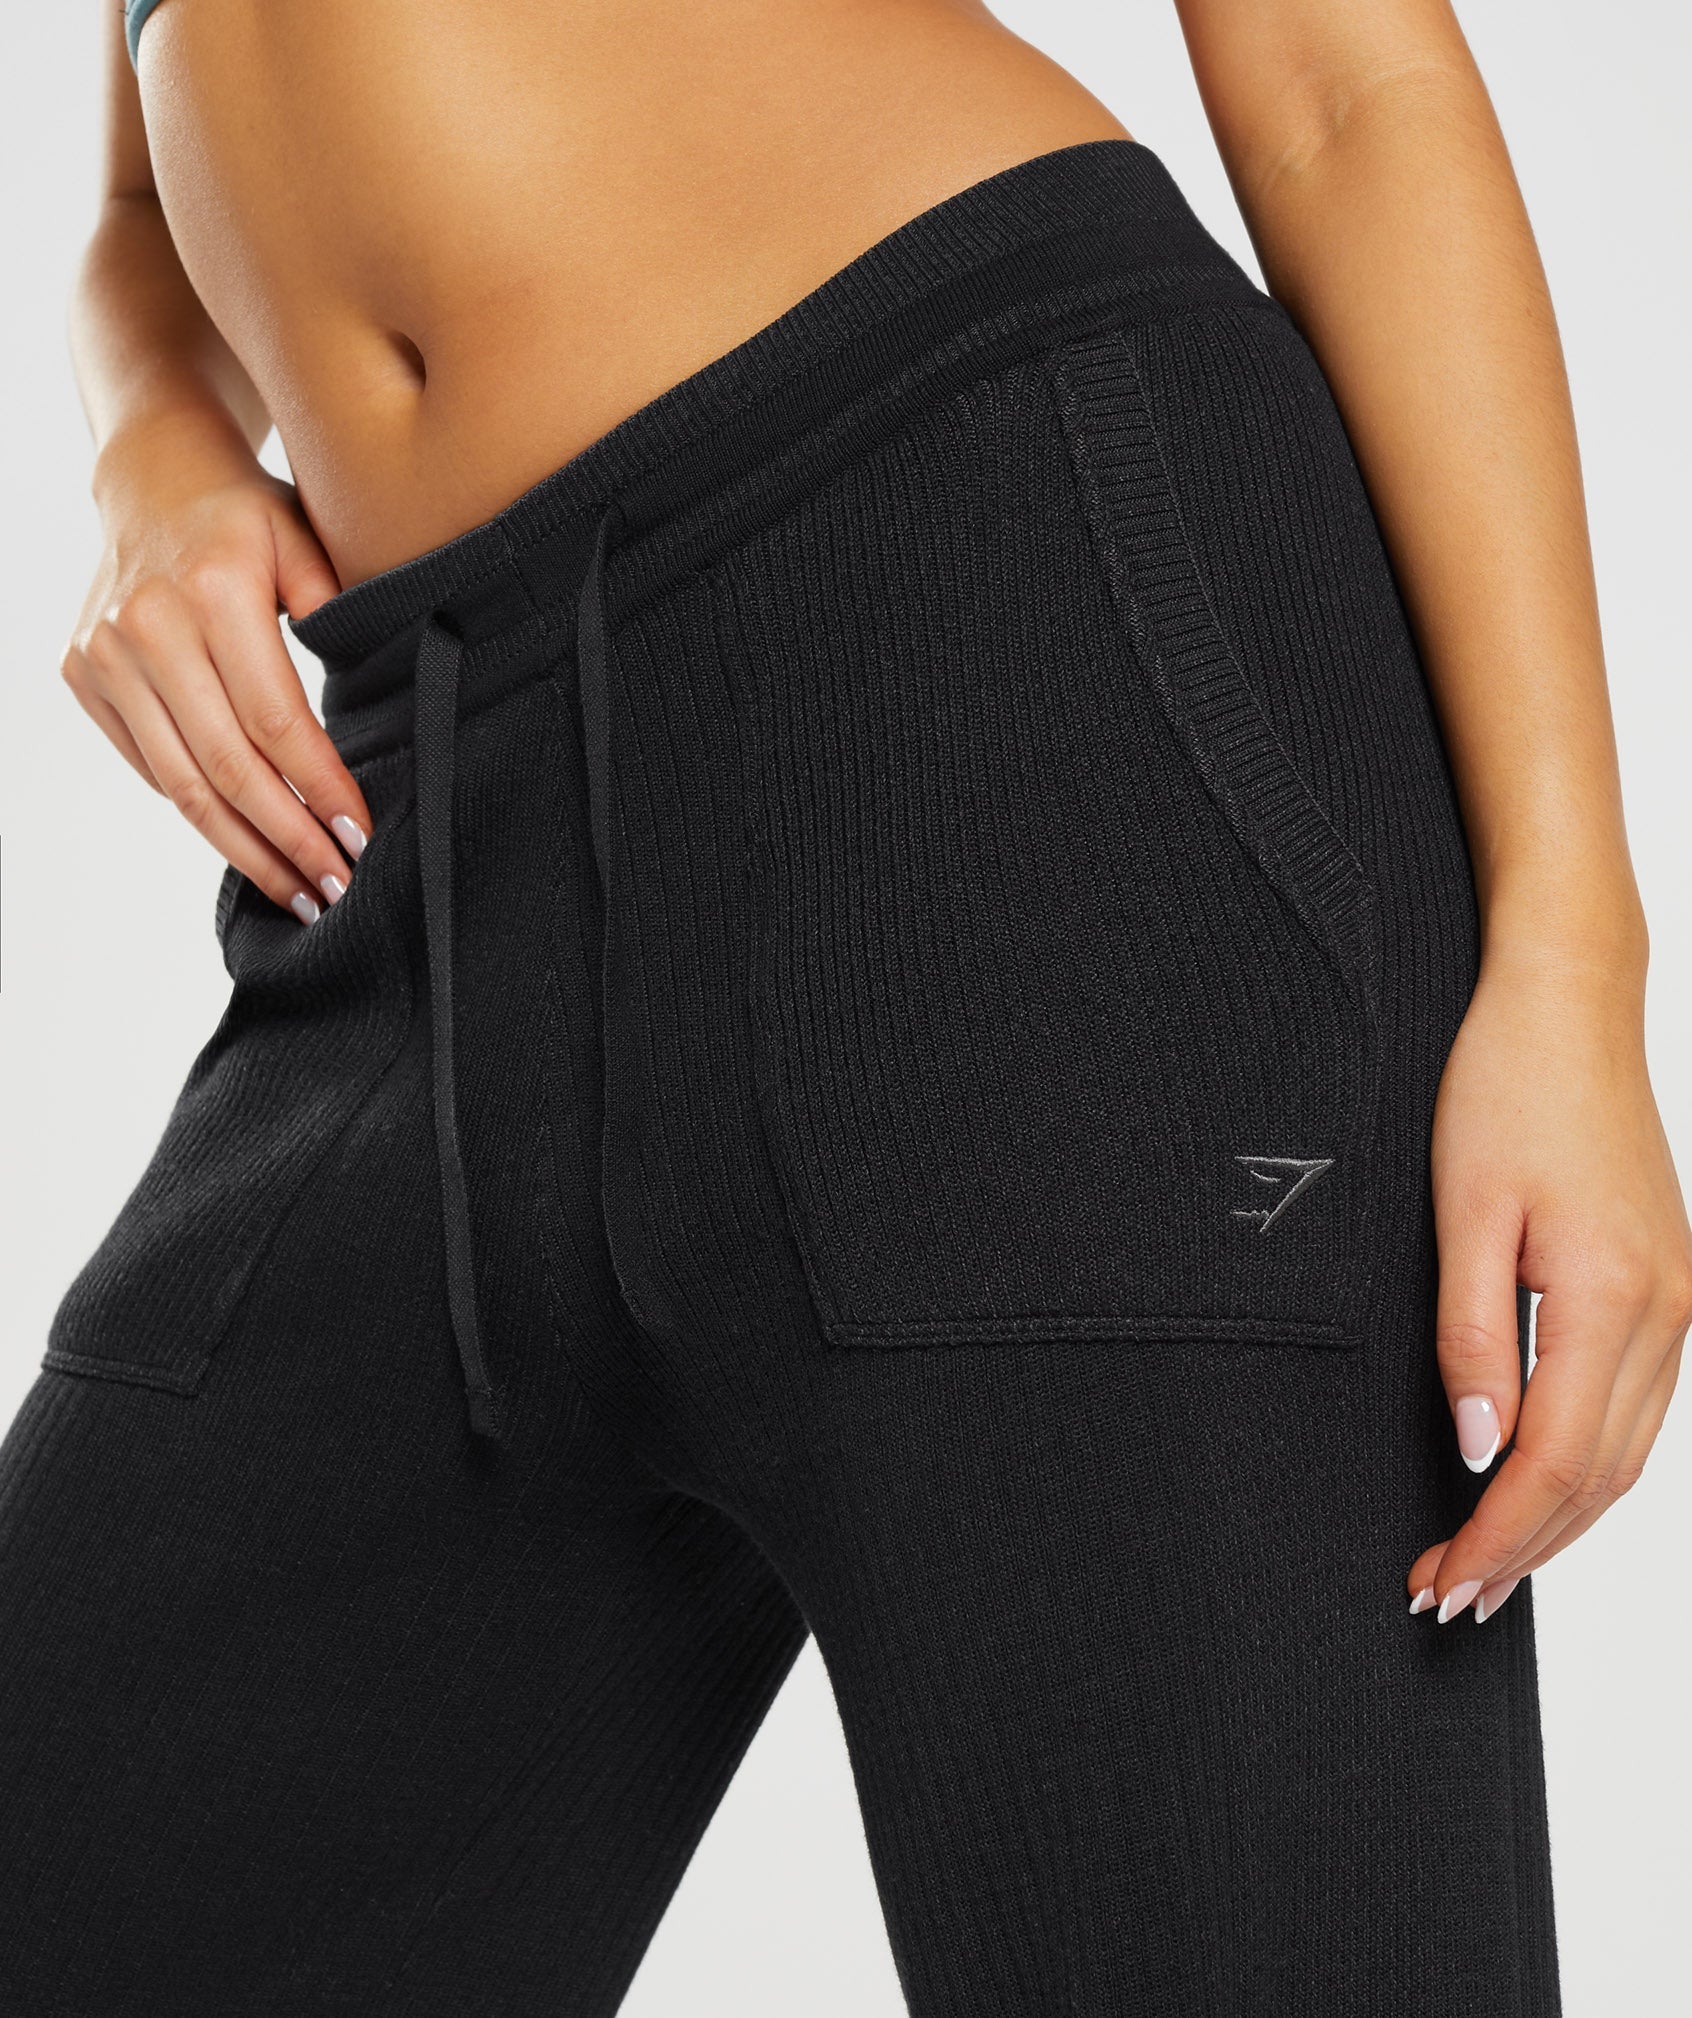 Pause Knitwear Joggers in Black/Onyx Grey - view 6